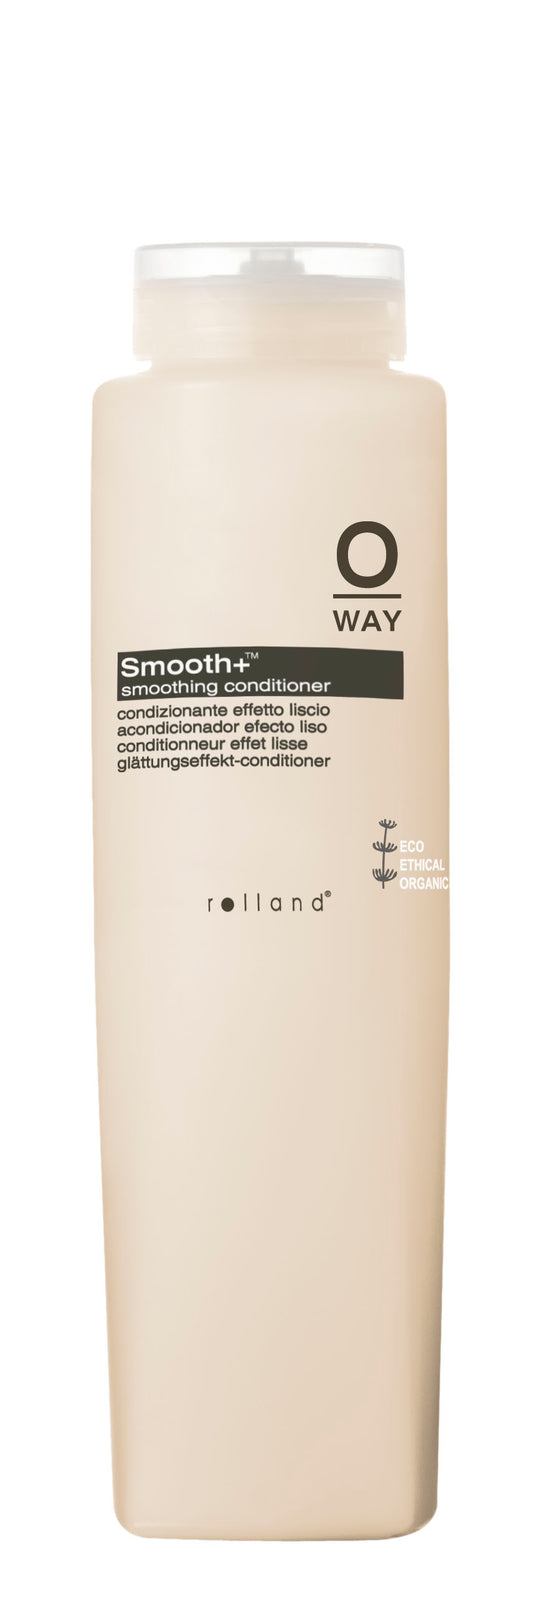 Oway Smooth Conditioner 1,000 ml.